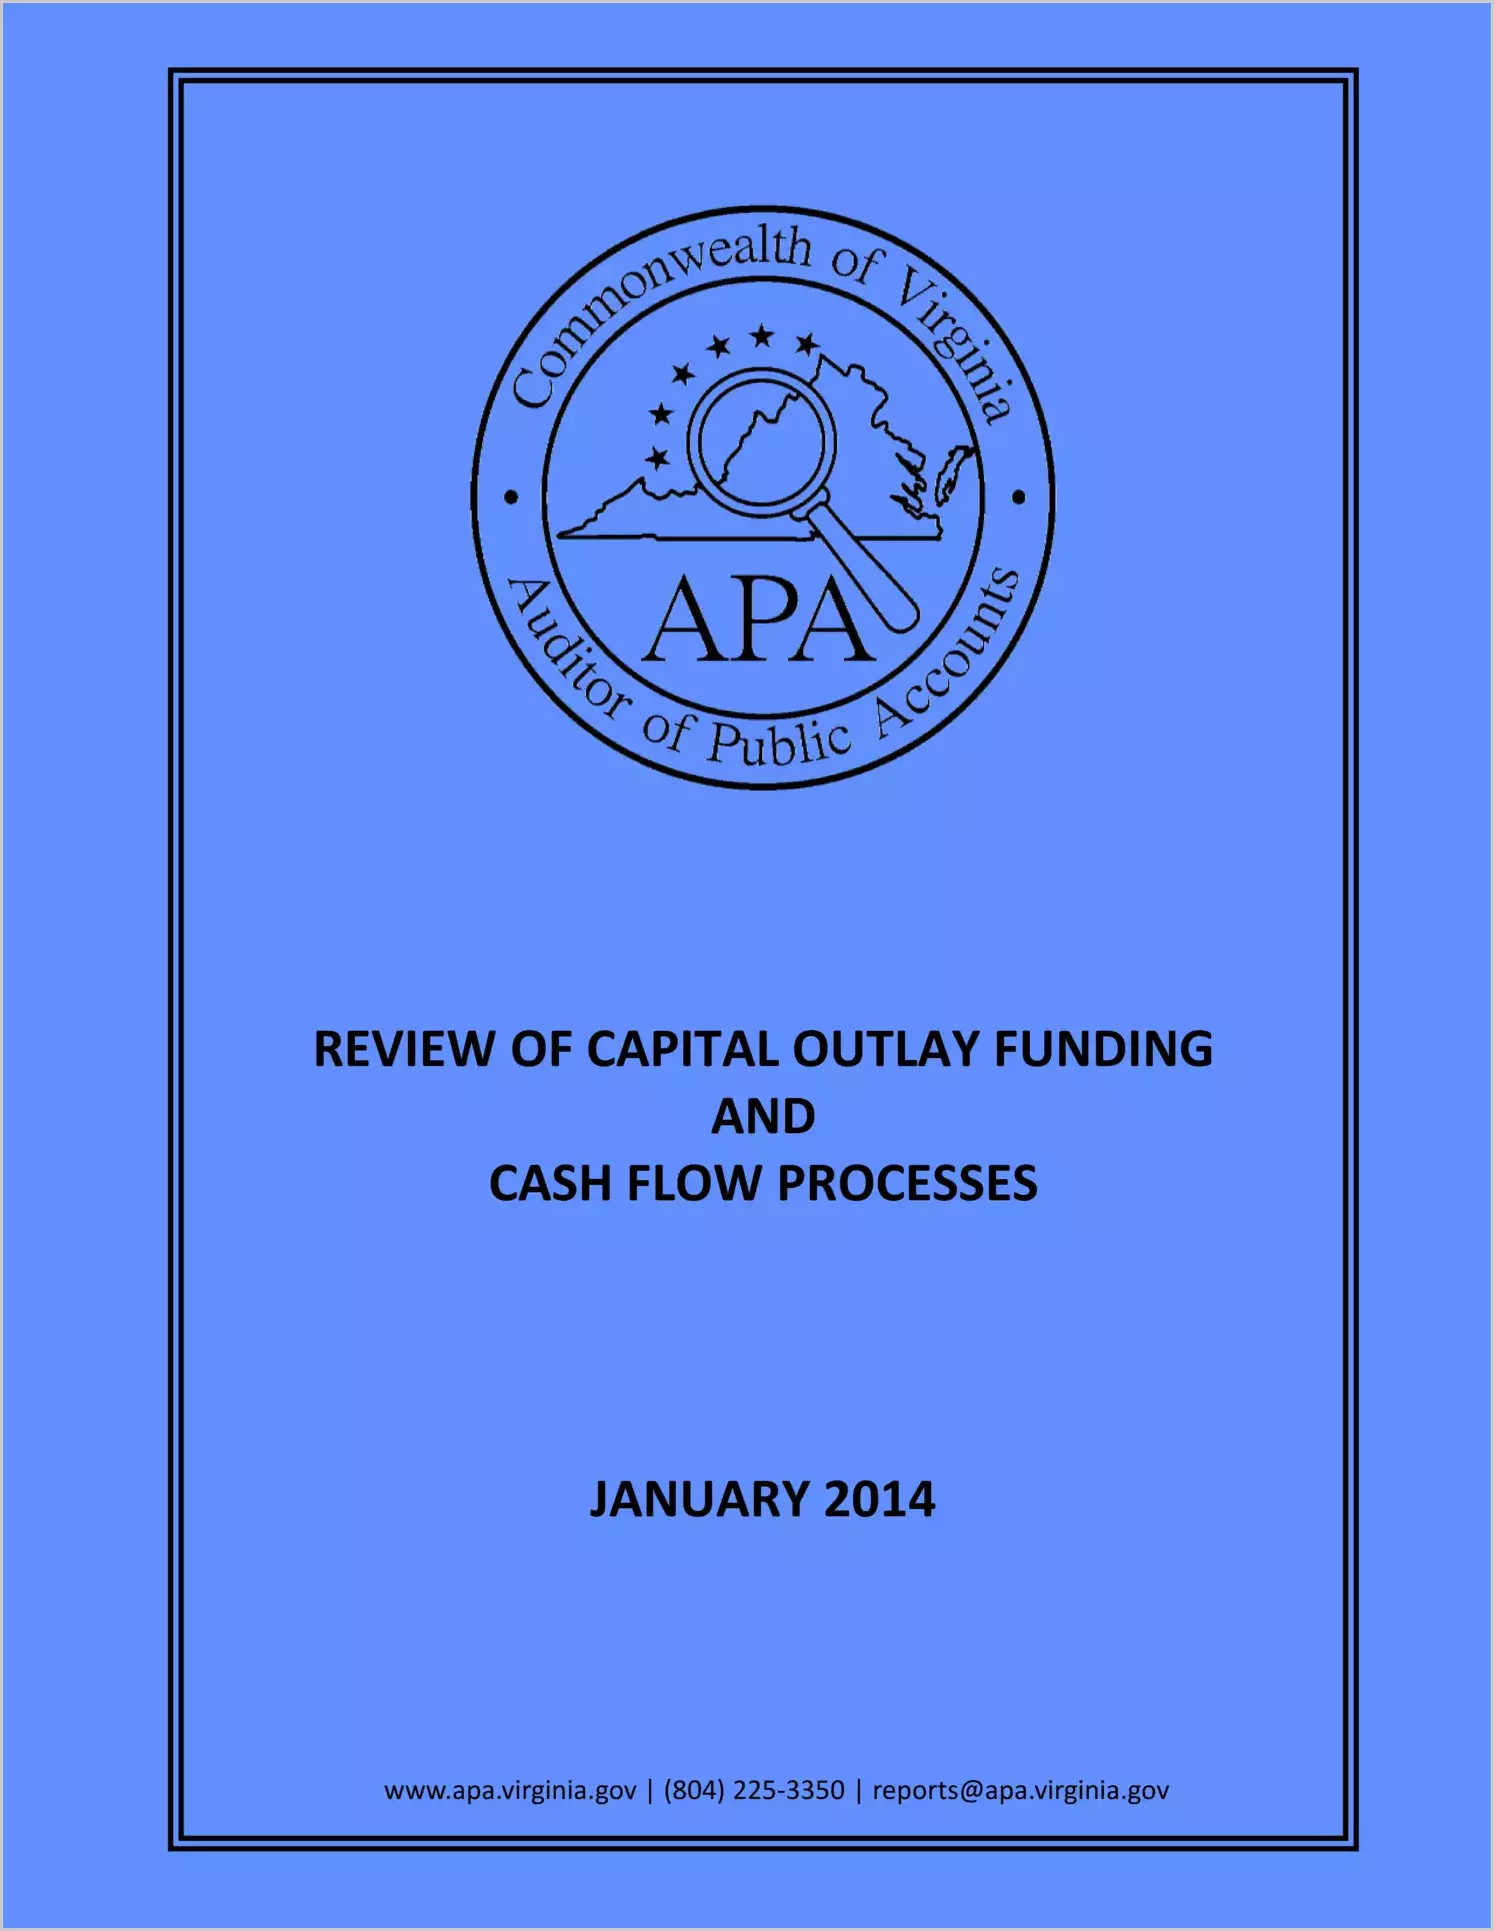 Review of Capital Outlay Funding and Cash Flow Processes - January 2014